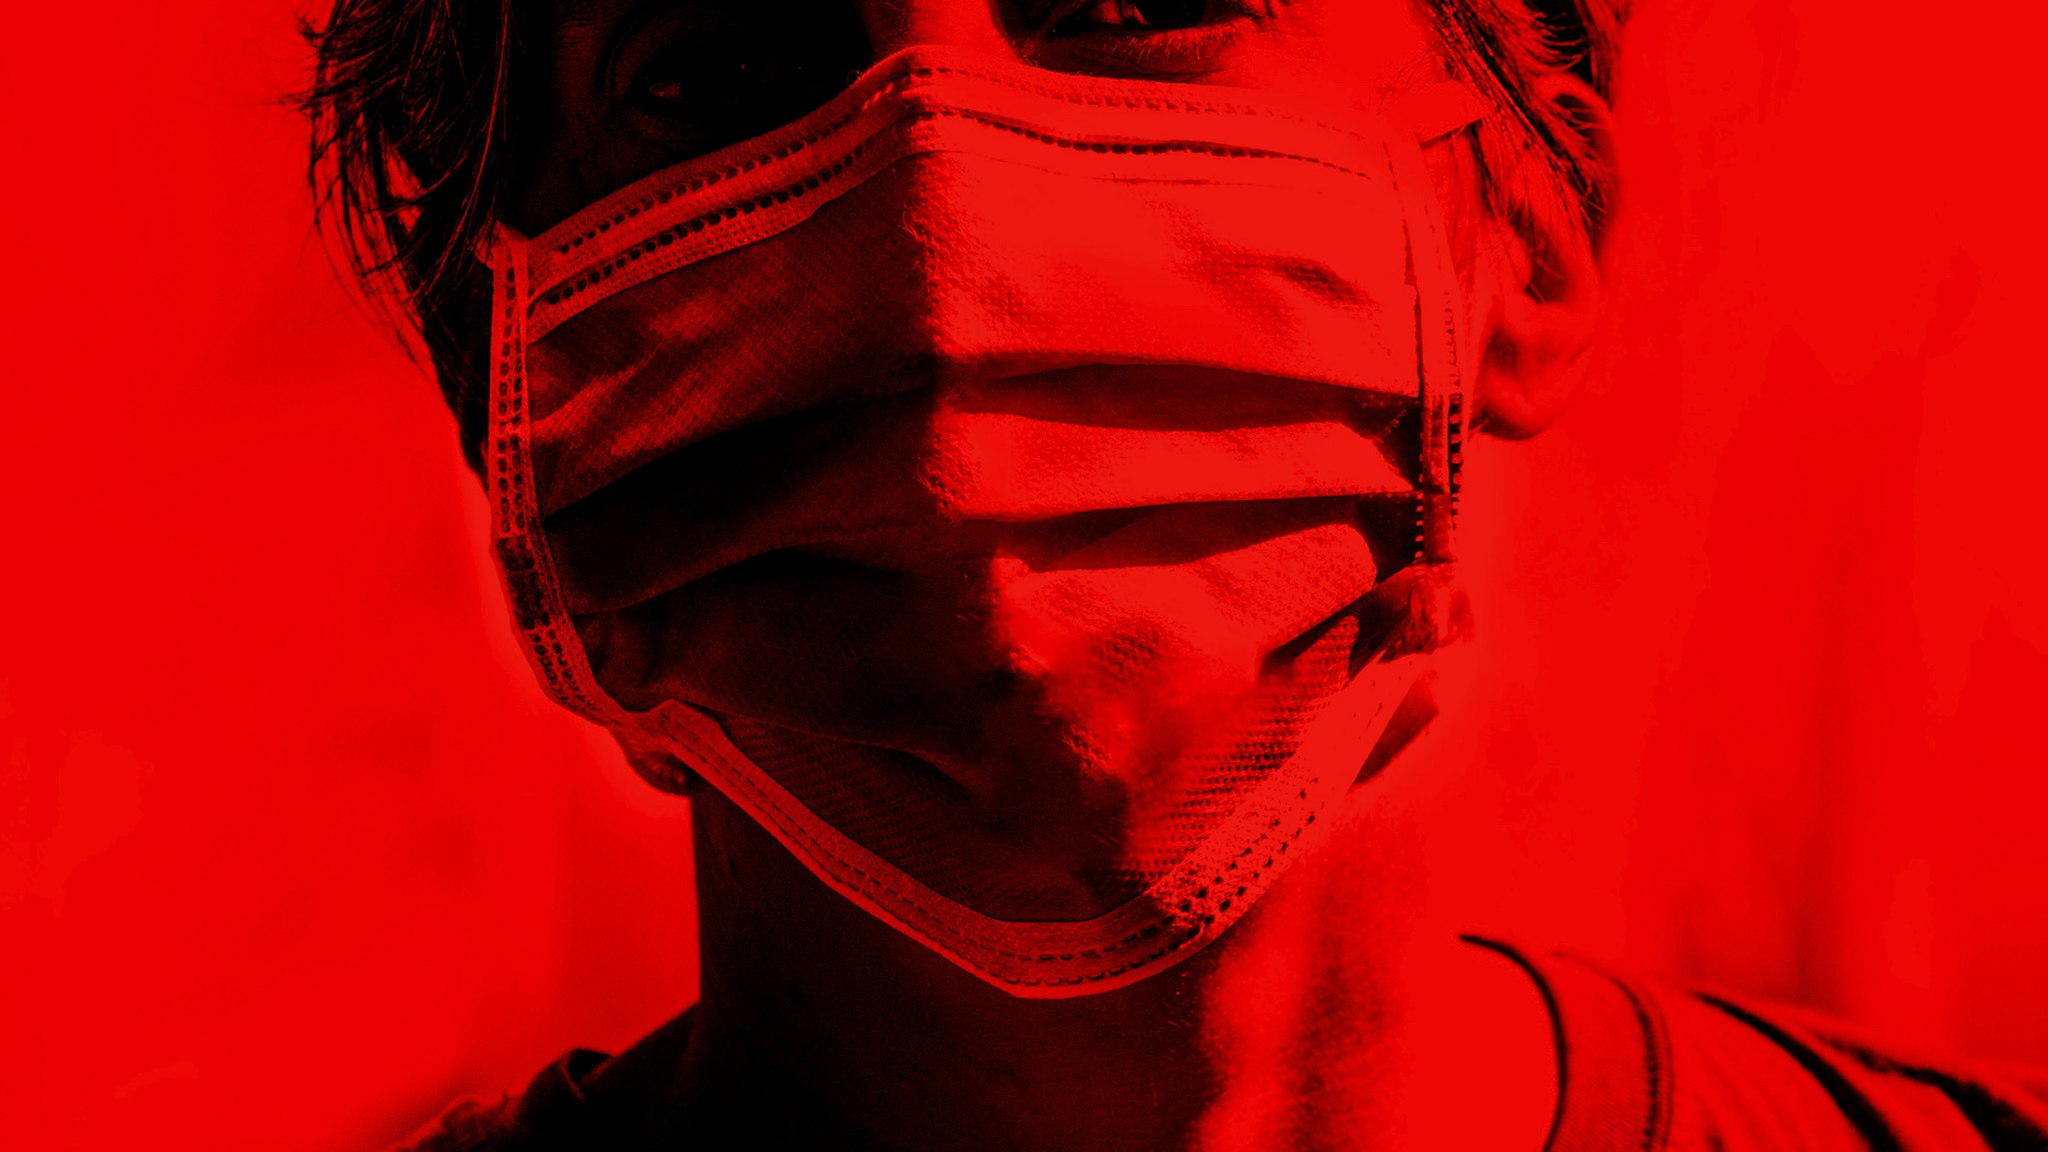 Woman wearing a surgical mask, protective face mask against infectious diseases like coronavirus, COVID-19 and influenza